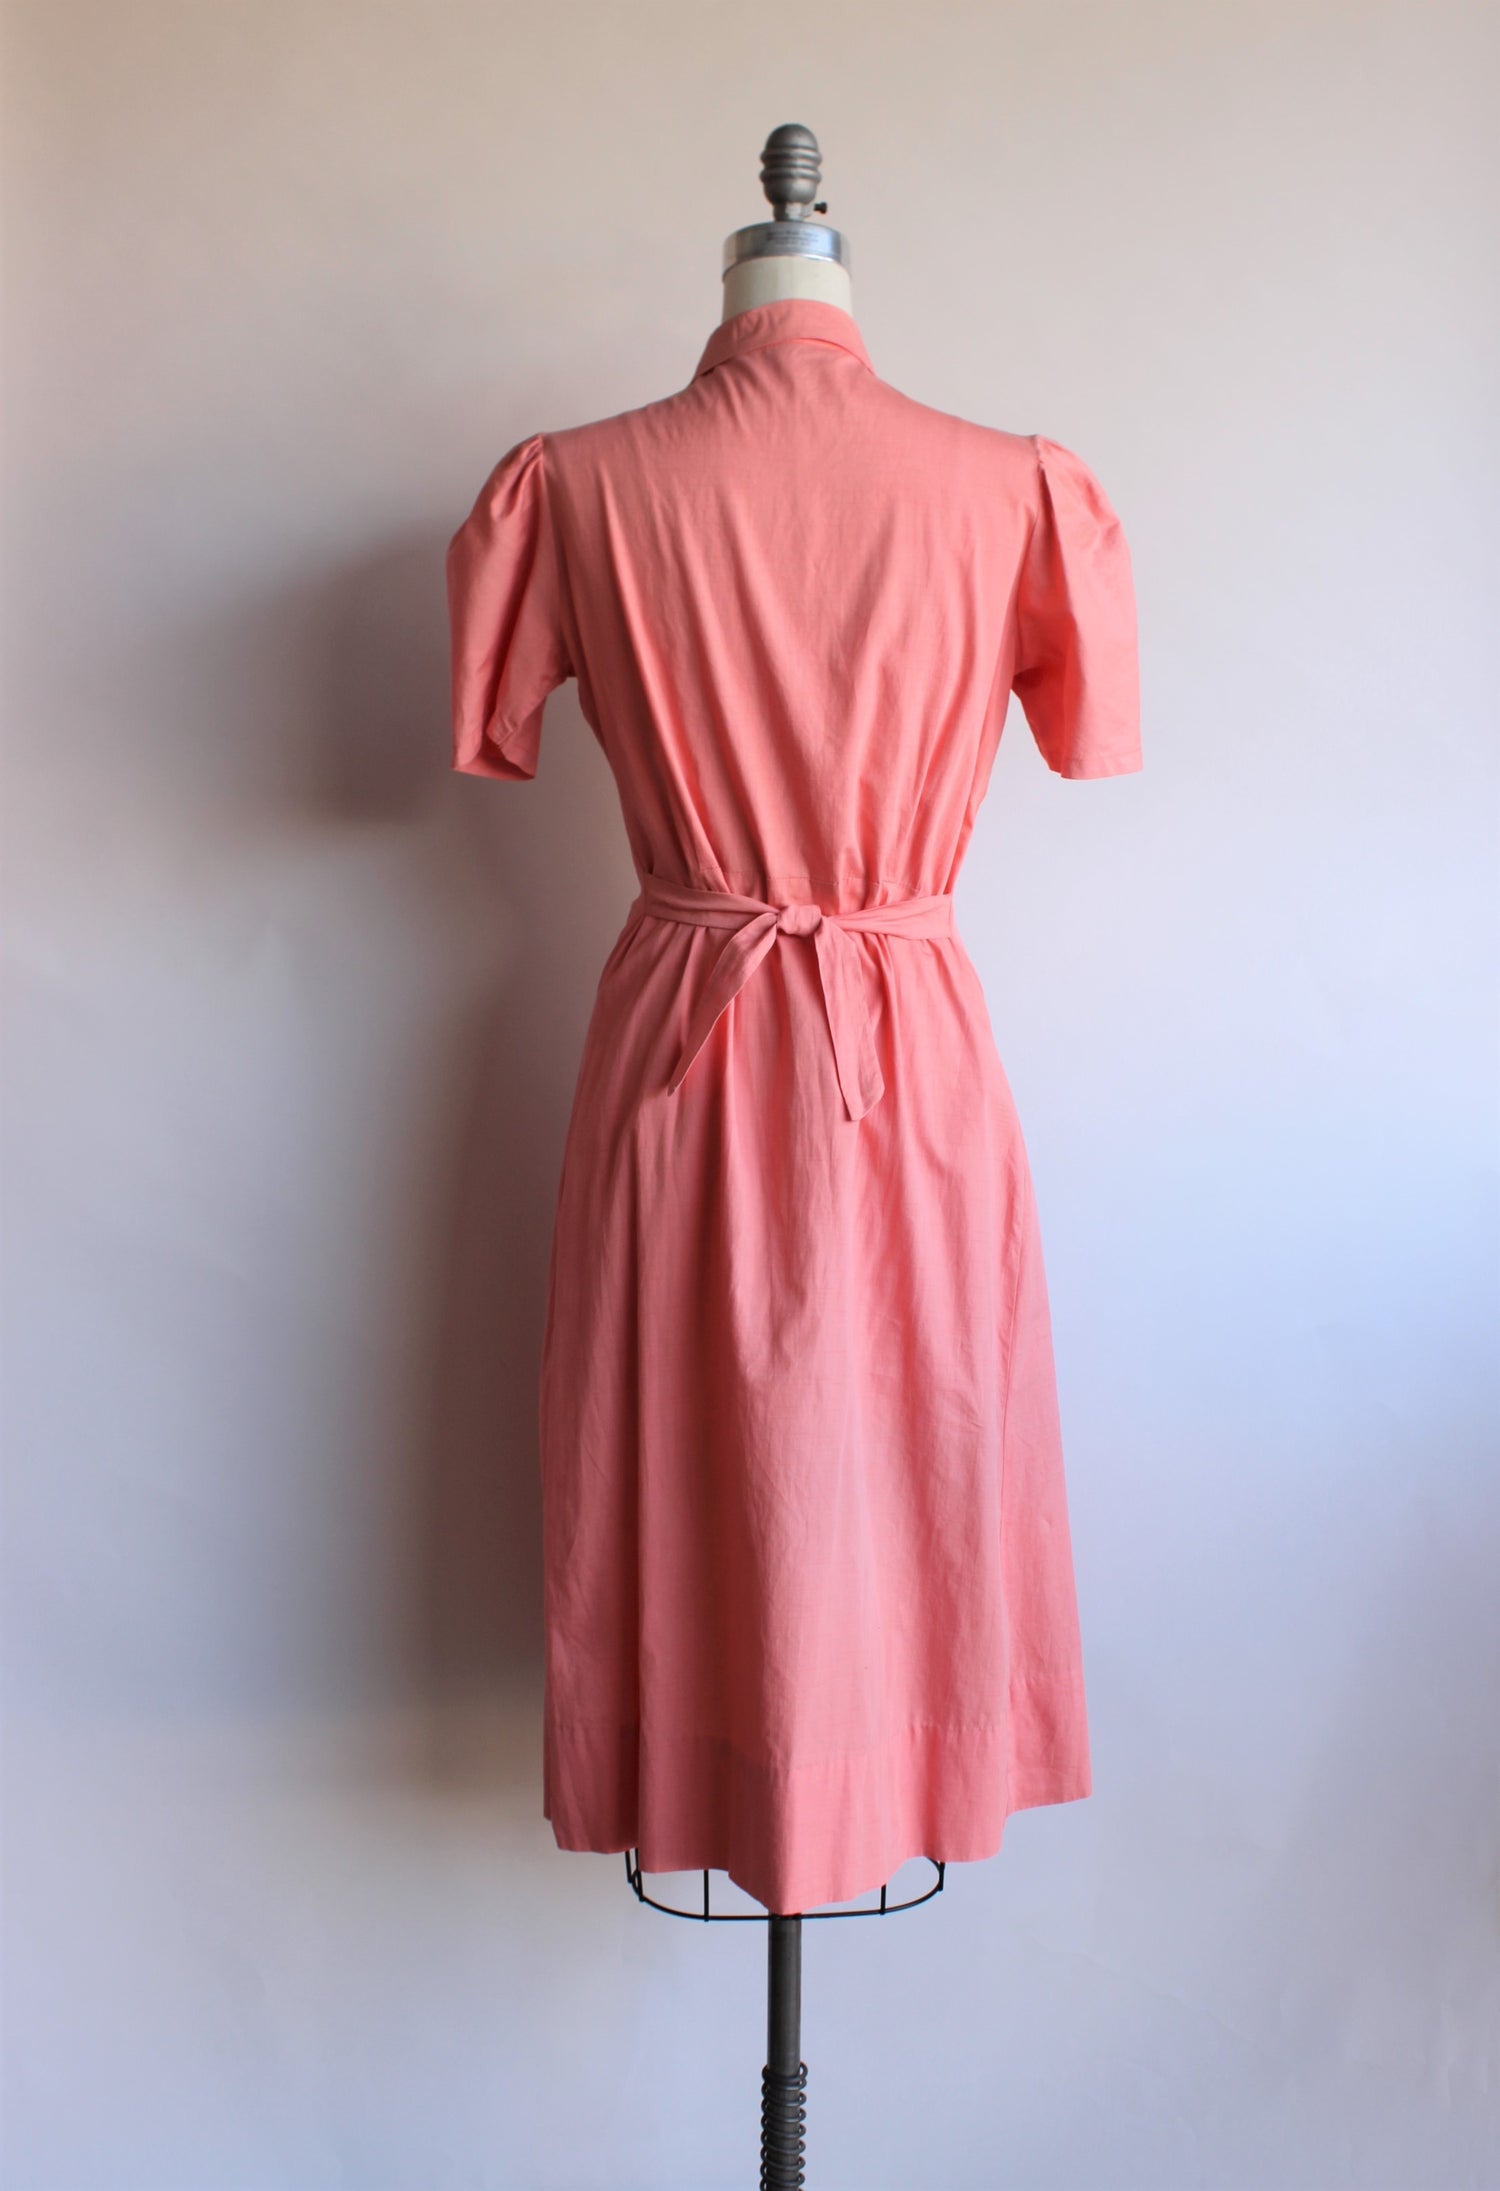 Vintage 1950s Peach Dress with Tulips